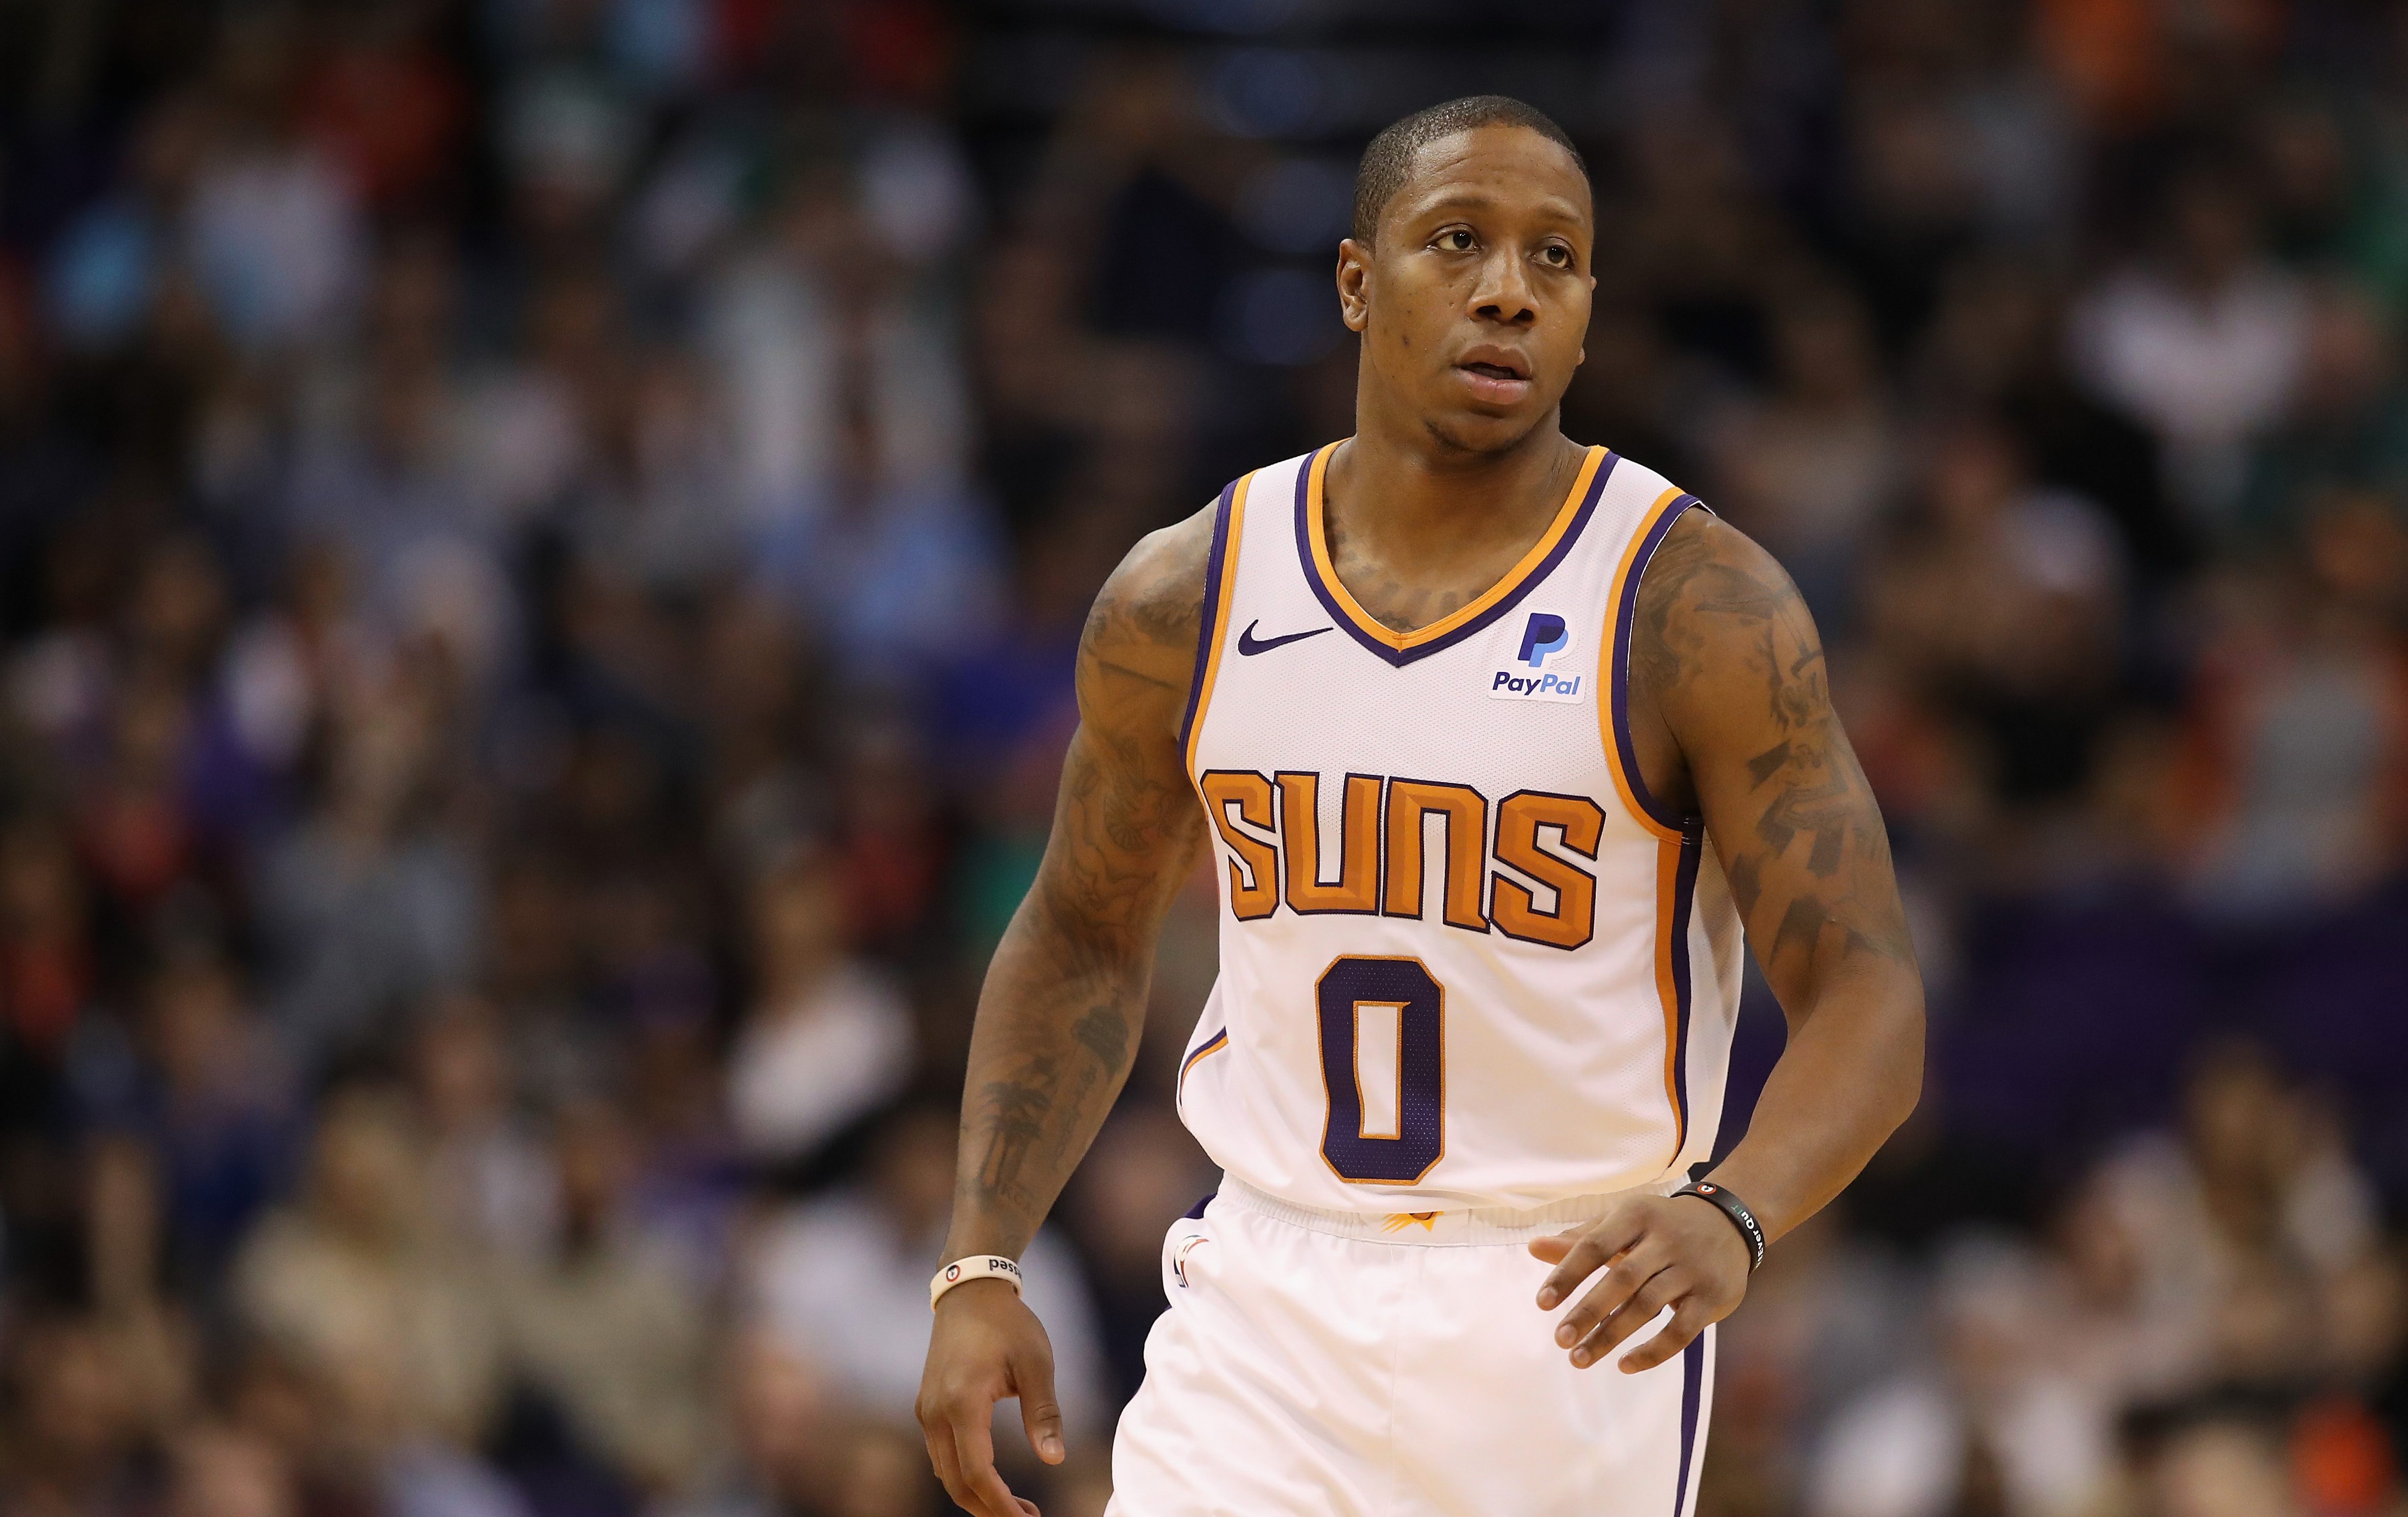 Suns Roster & Starting Lineup After Isaiah Canaan’s Release | Heavy.com